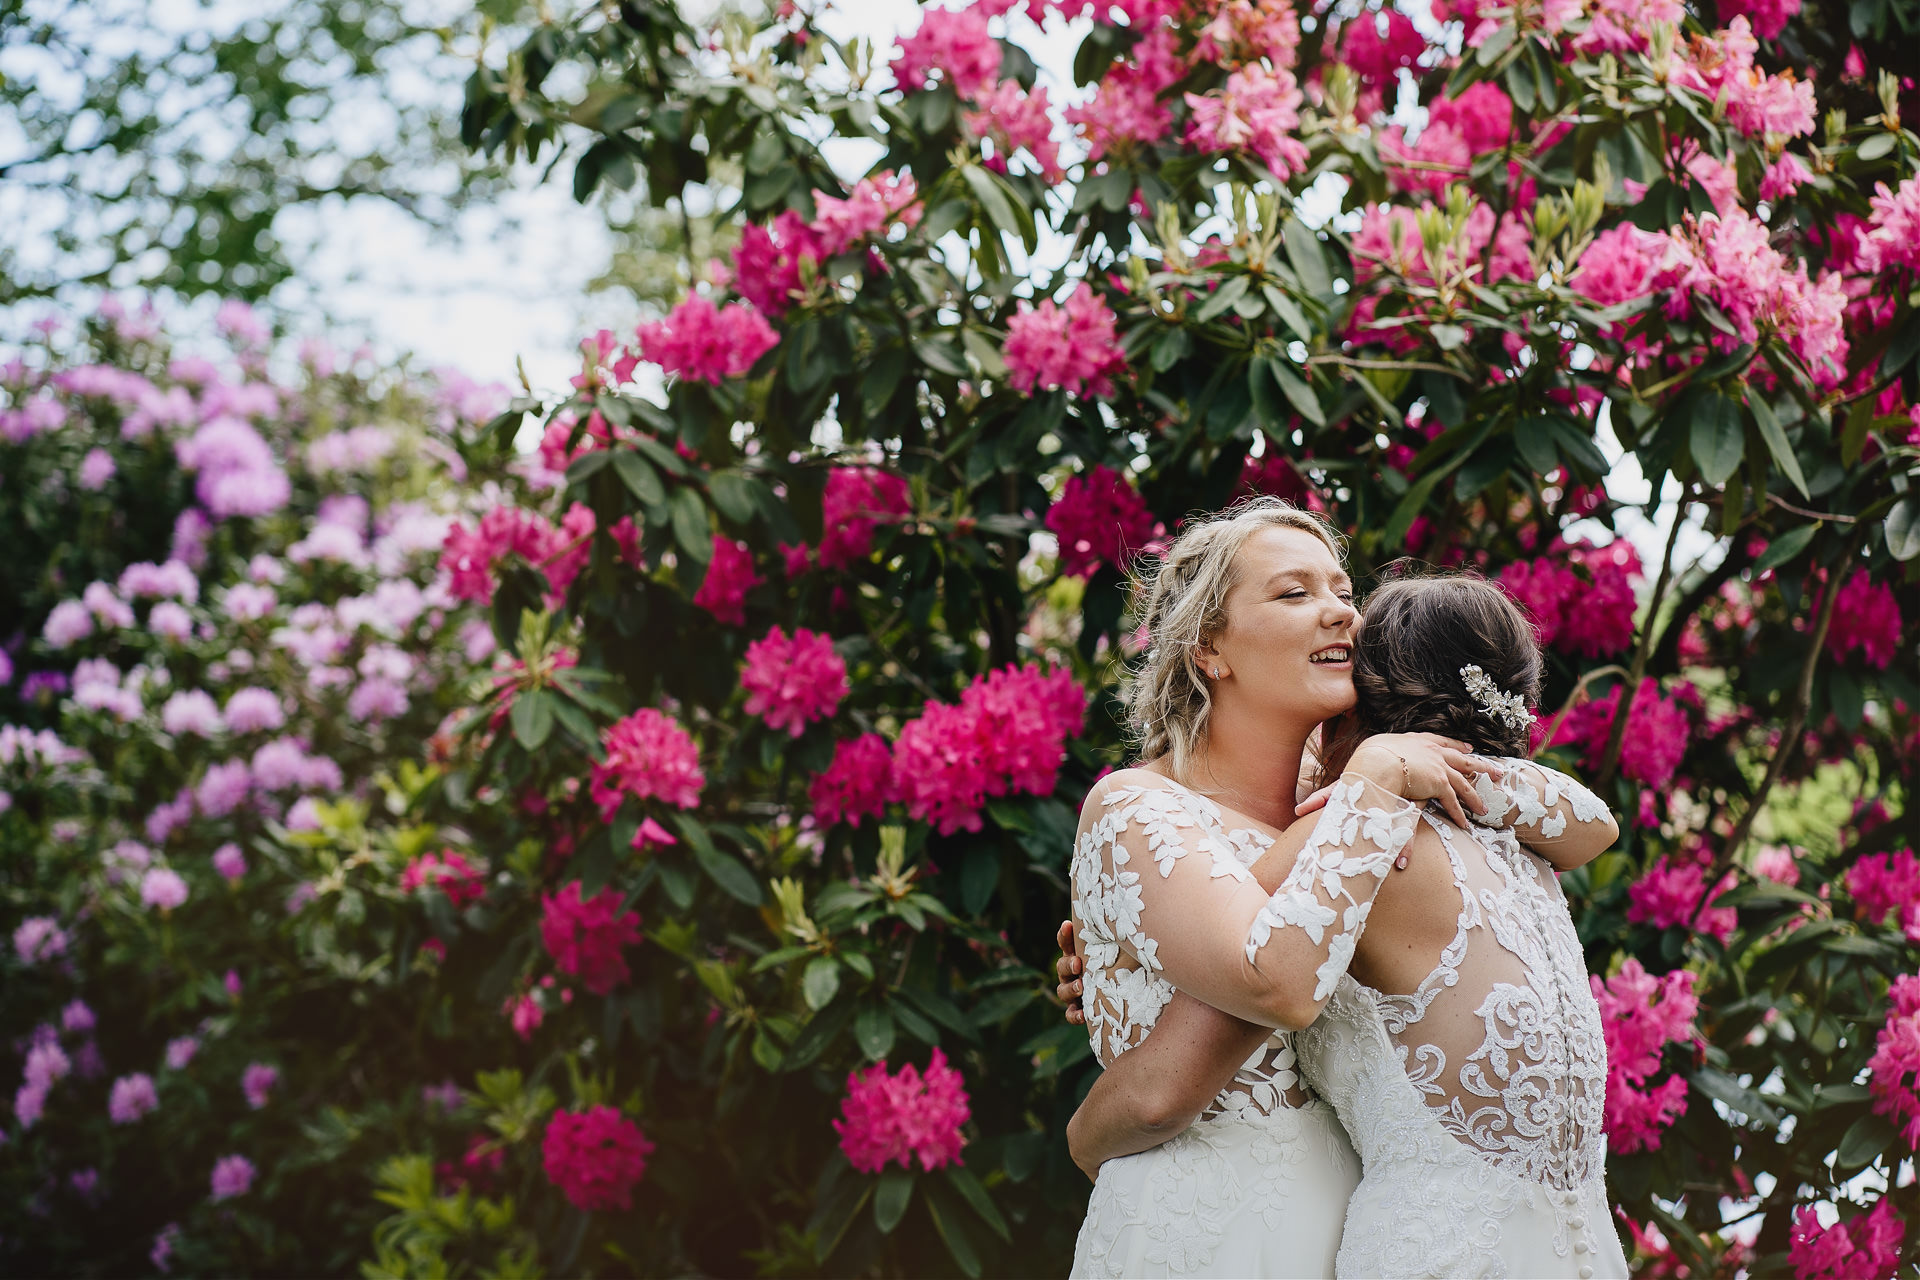 Two brides cuddling together in front of a beautiful display of large pink flowers at their Cadhay wedding in Devon